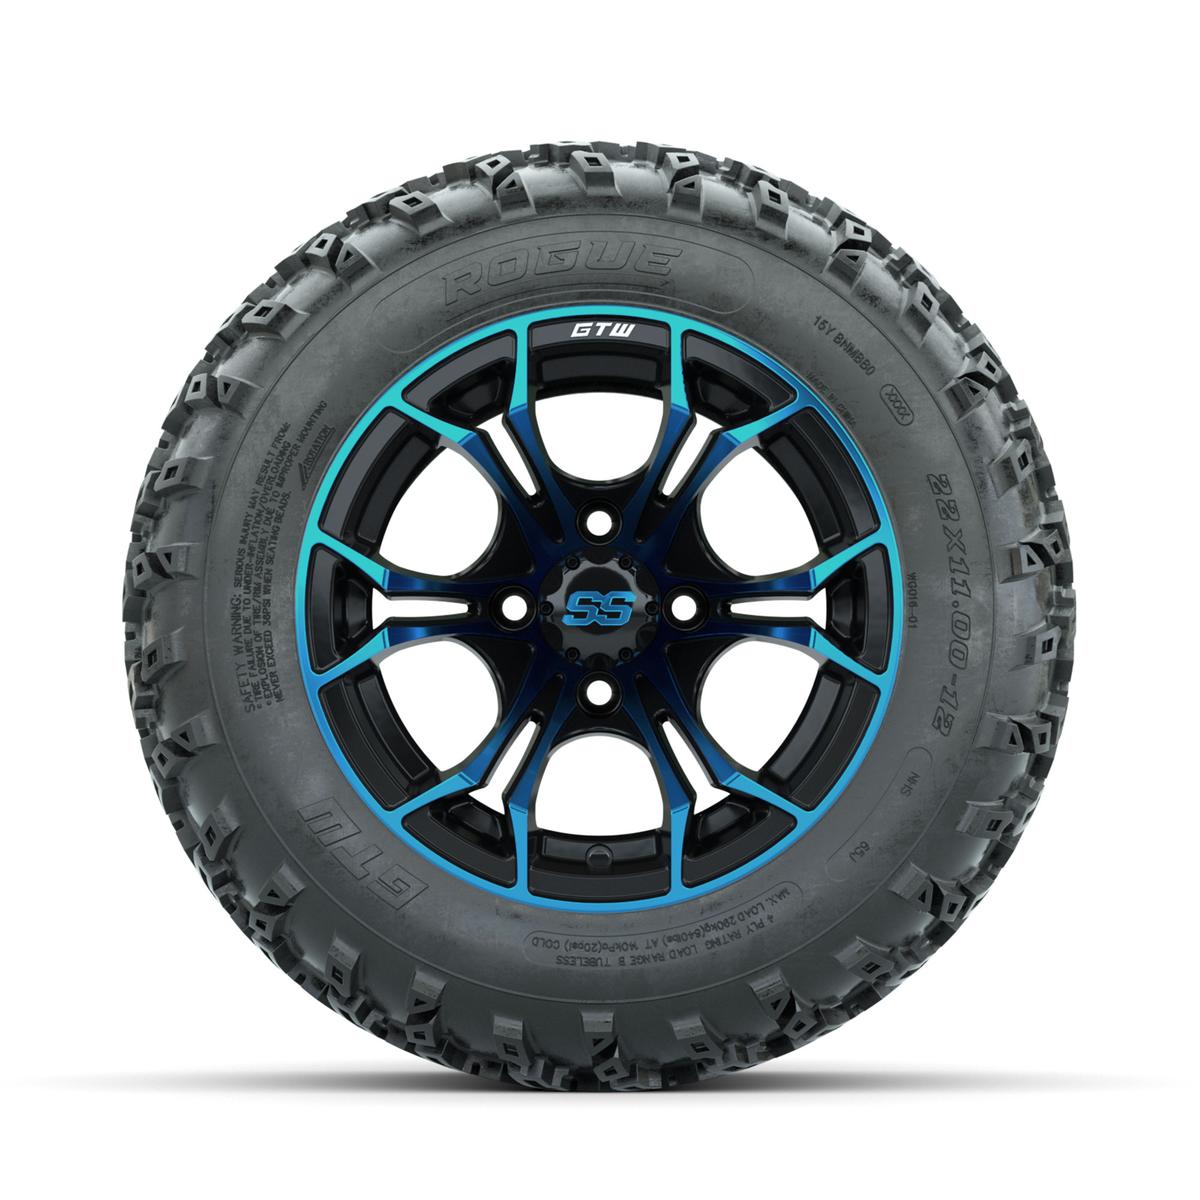 GTW Spyder Blue/Black 12 in Wheels with 22x11.00-12 Rogue All Terrain Tires – Full Set